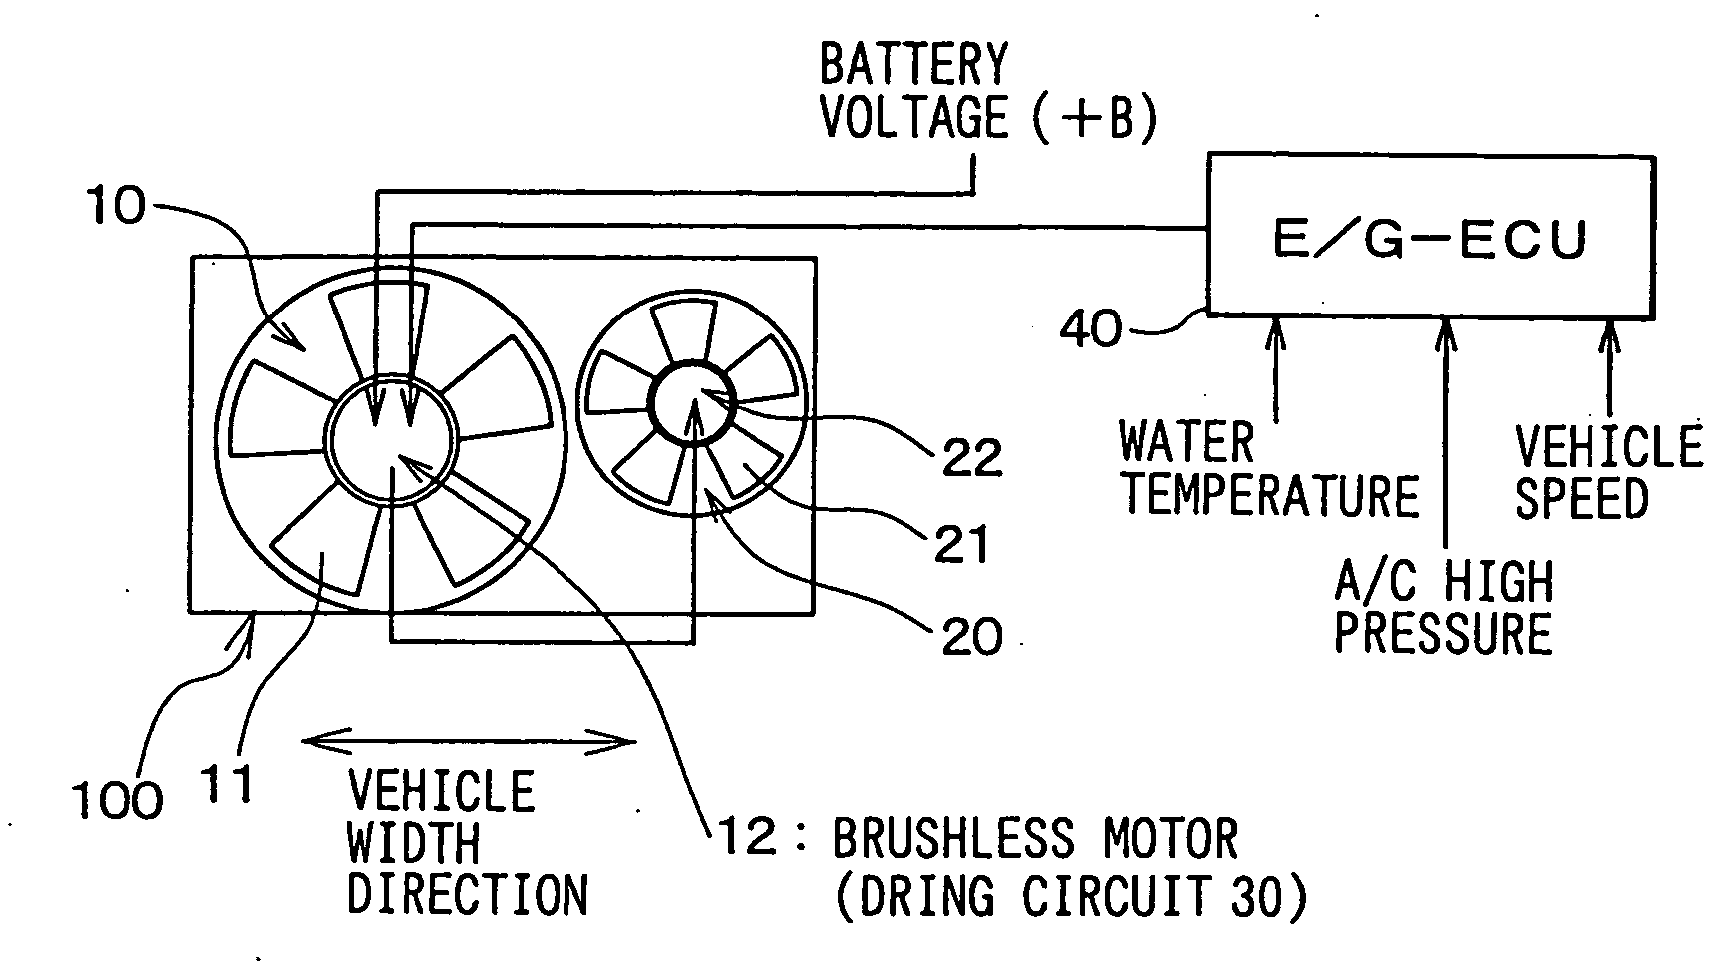 Electrical fan system for vehicle